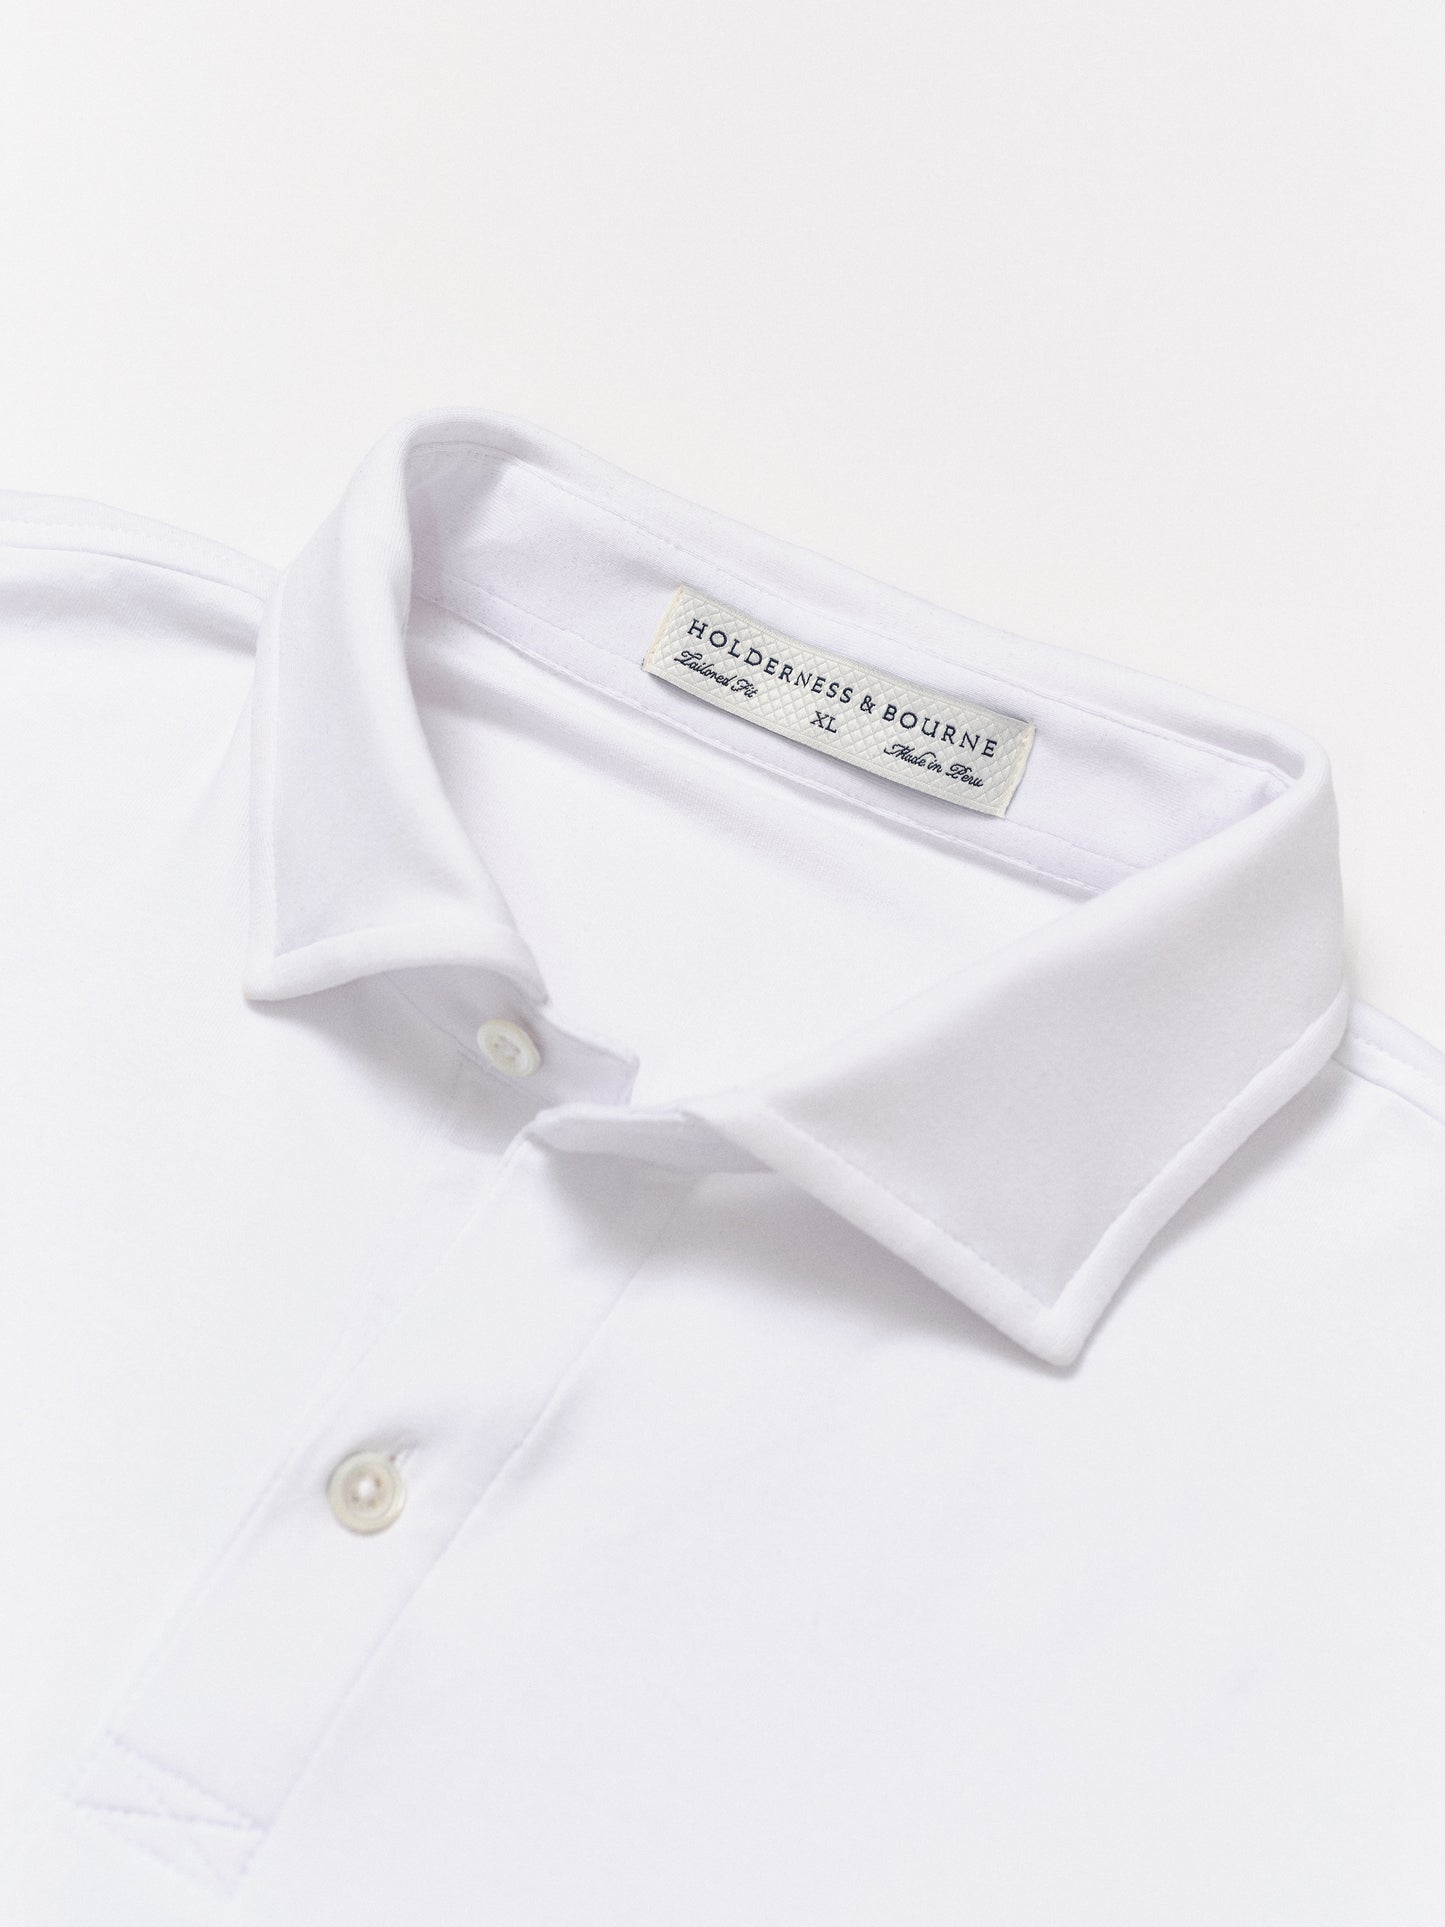 Holderness & Bourne Cotton Polo Shirt in White